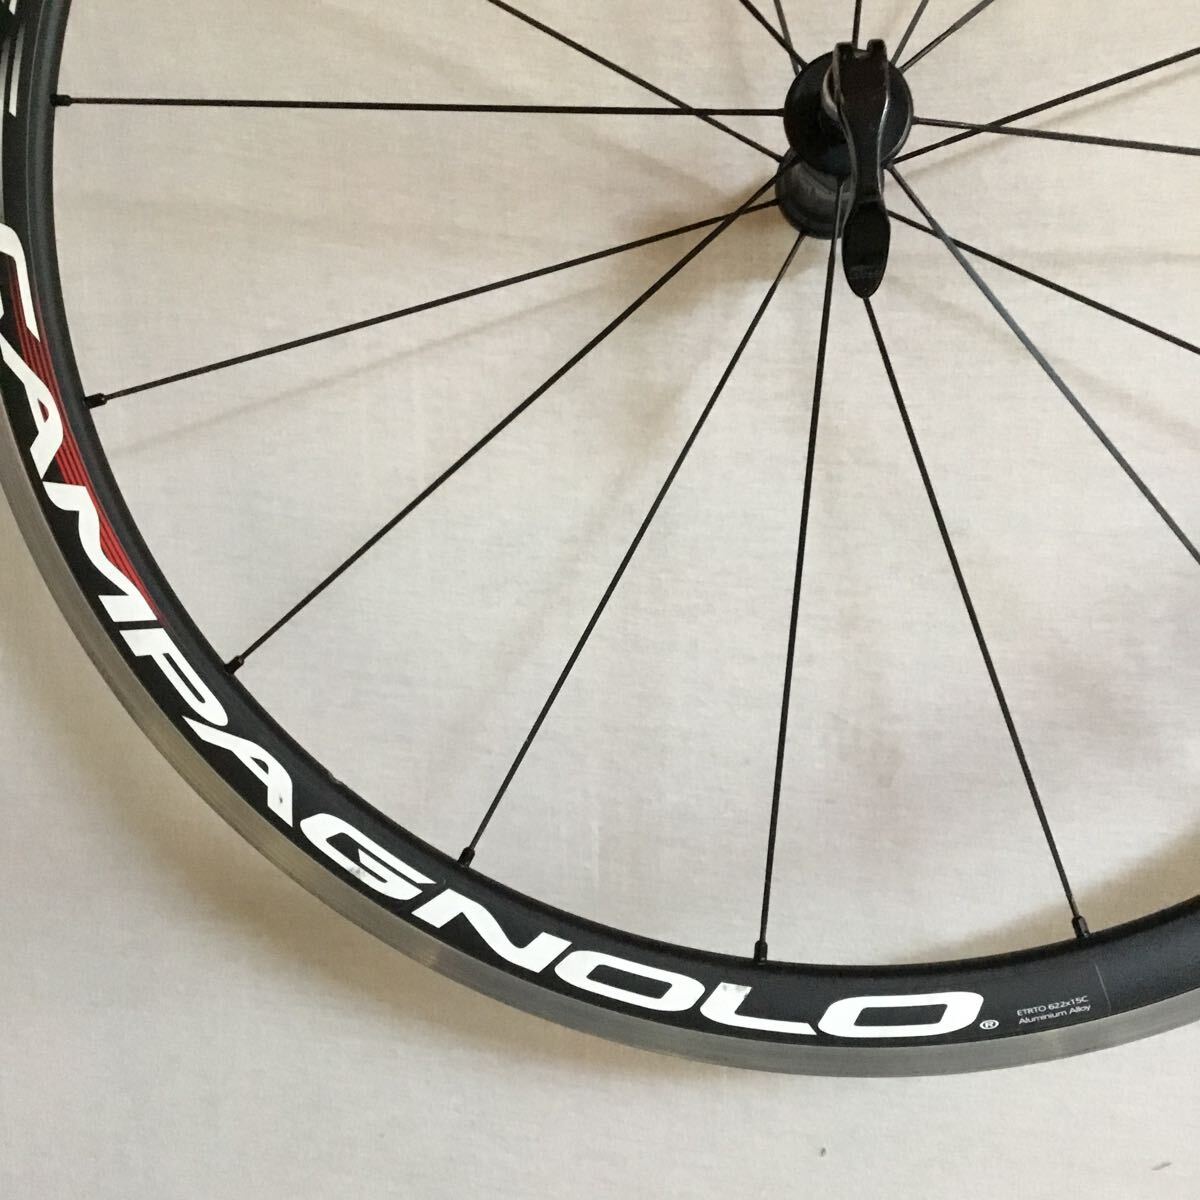 ＊M15 CAMPAGNOLO カンパニョーロ SCIROCCO 35 MM シロッコ 700C ホイール 前後セット 11速 クリンチャー 中古 _画像6